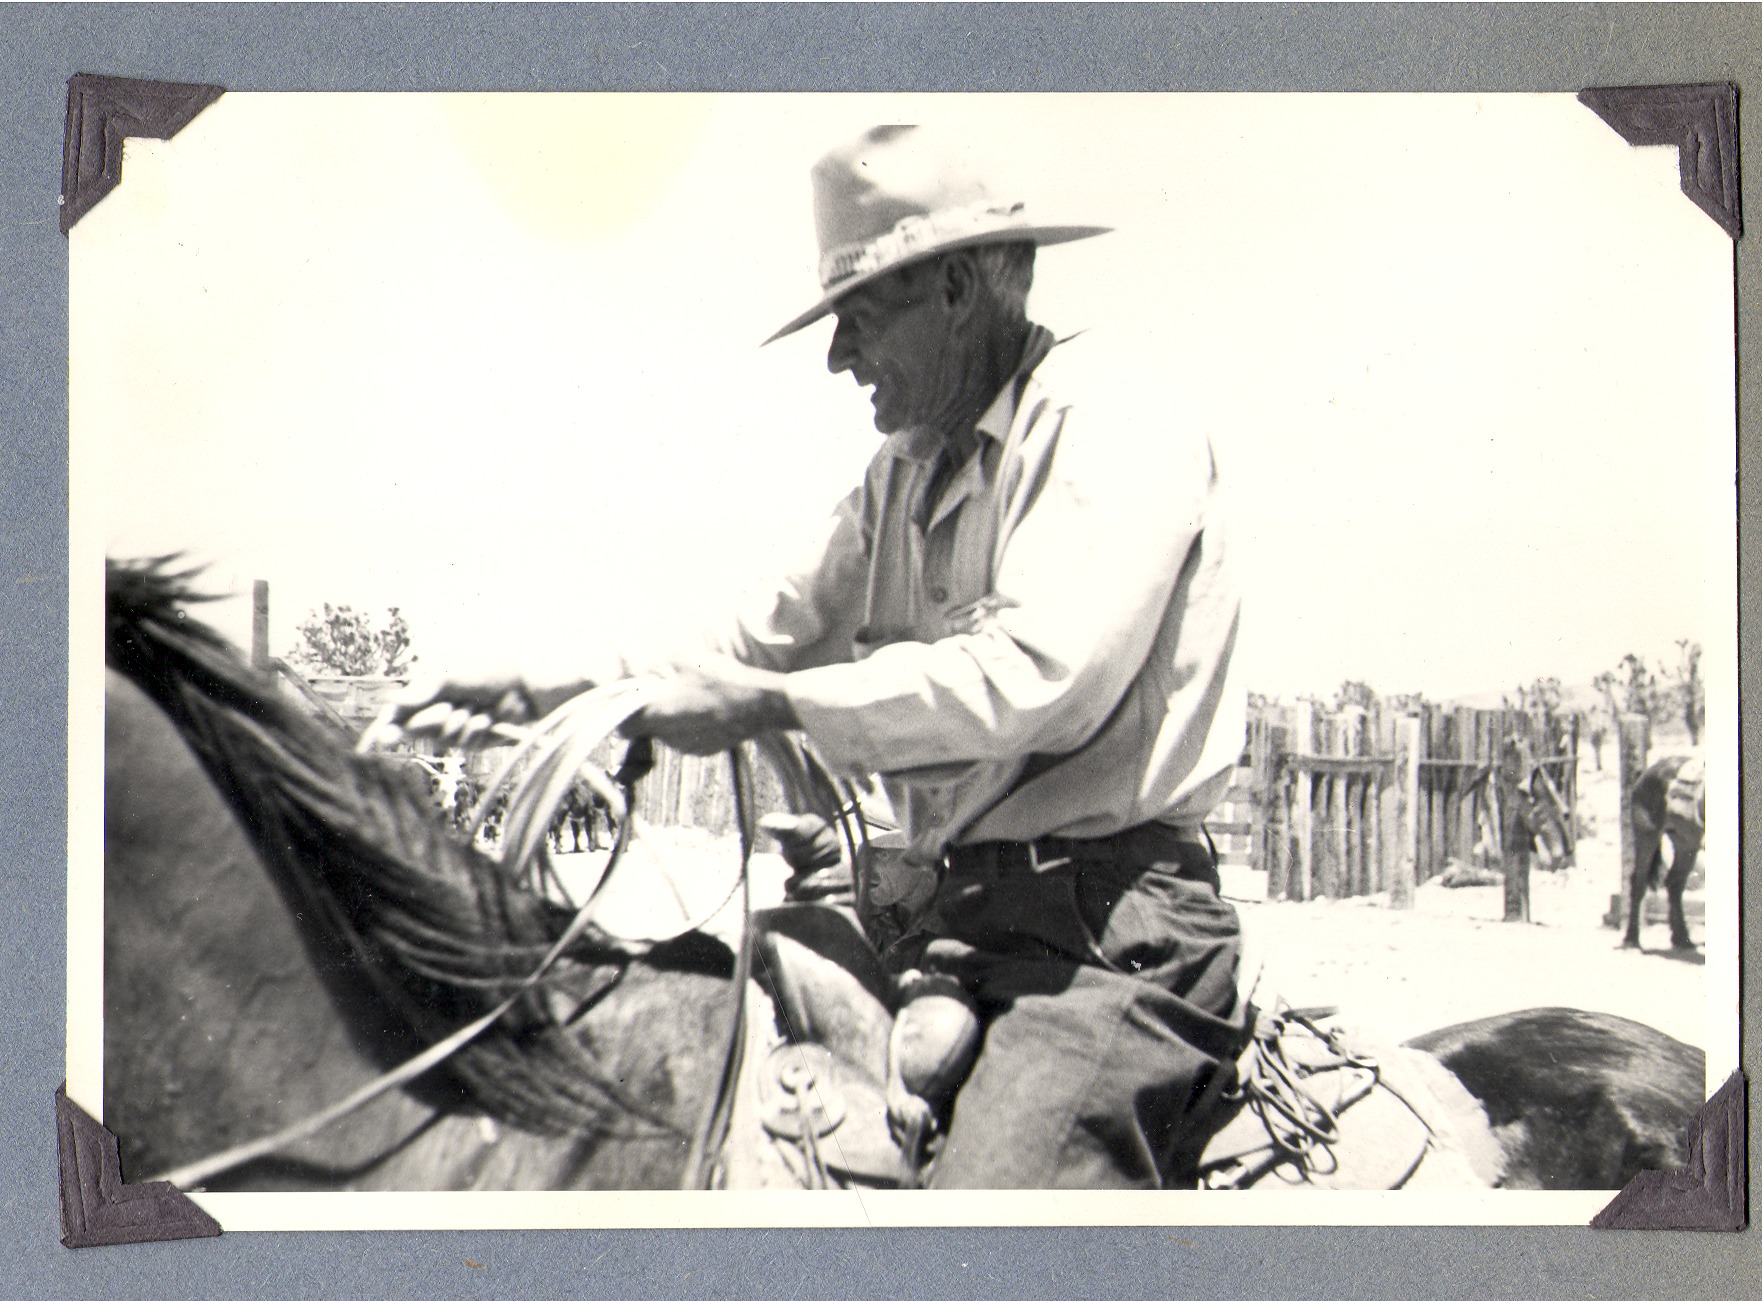 One of the foremen on horseback at Walking Box Ranch, Nevada: photographic print